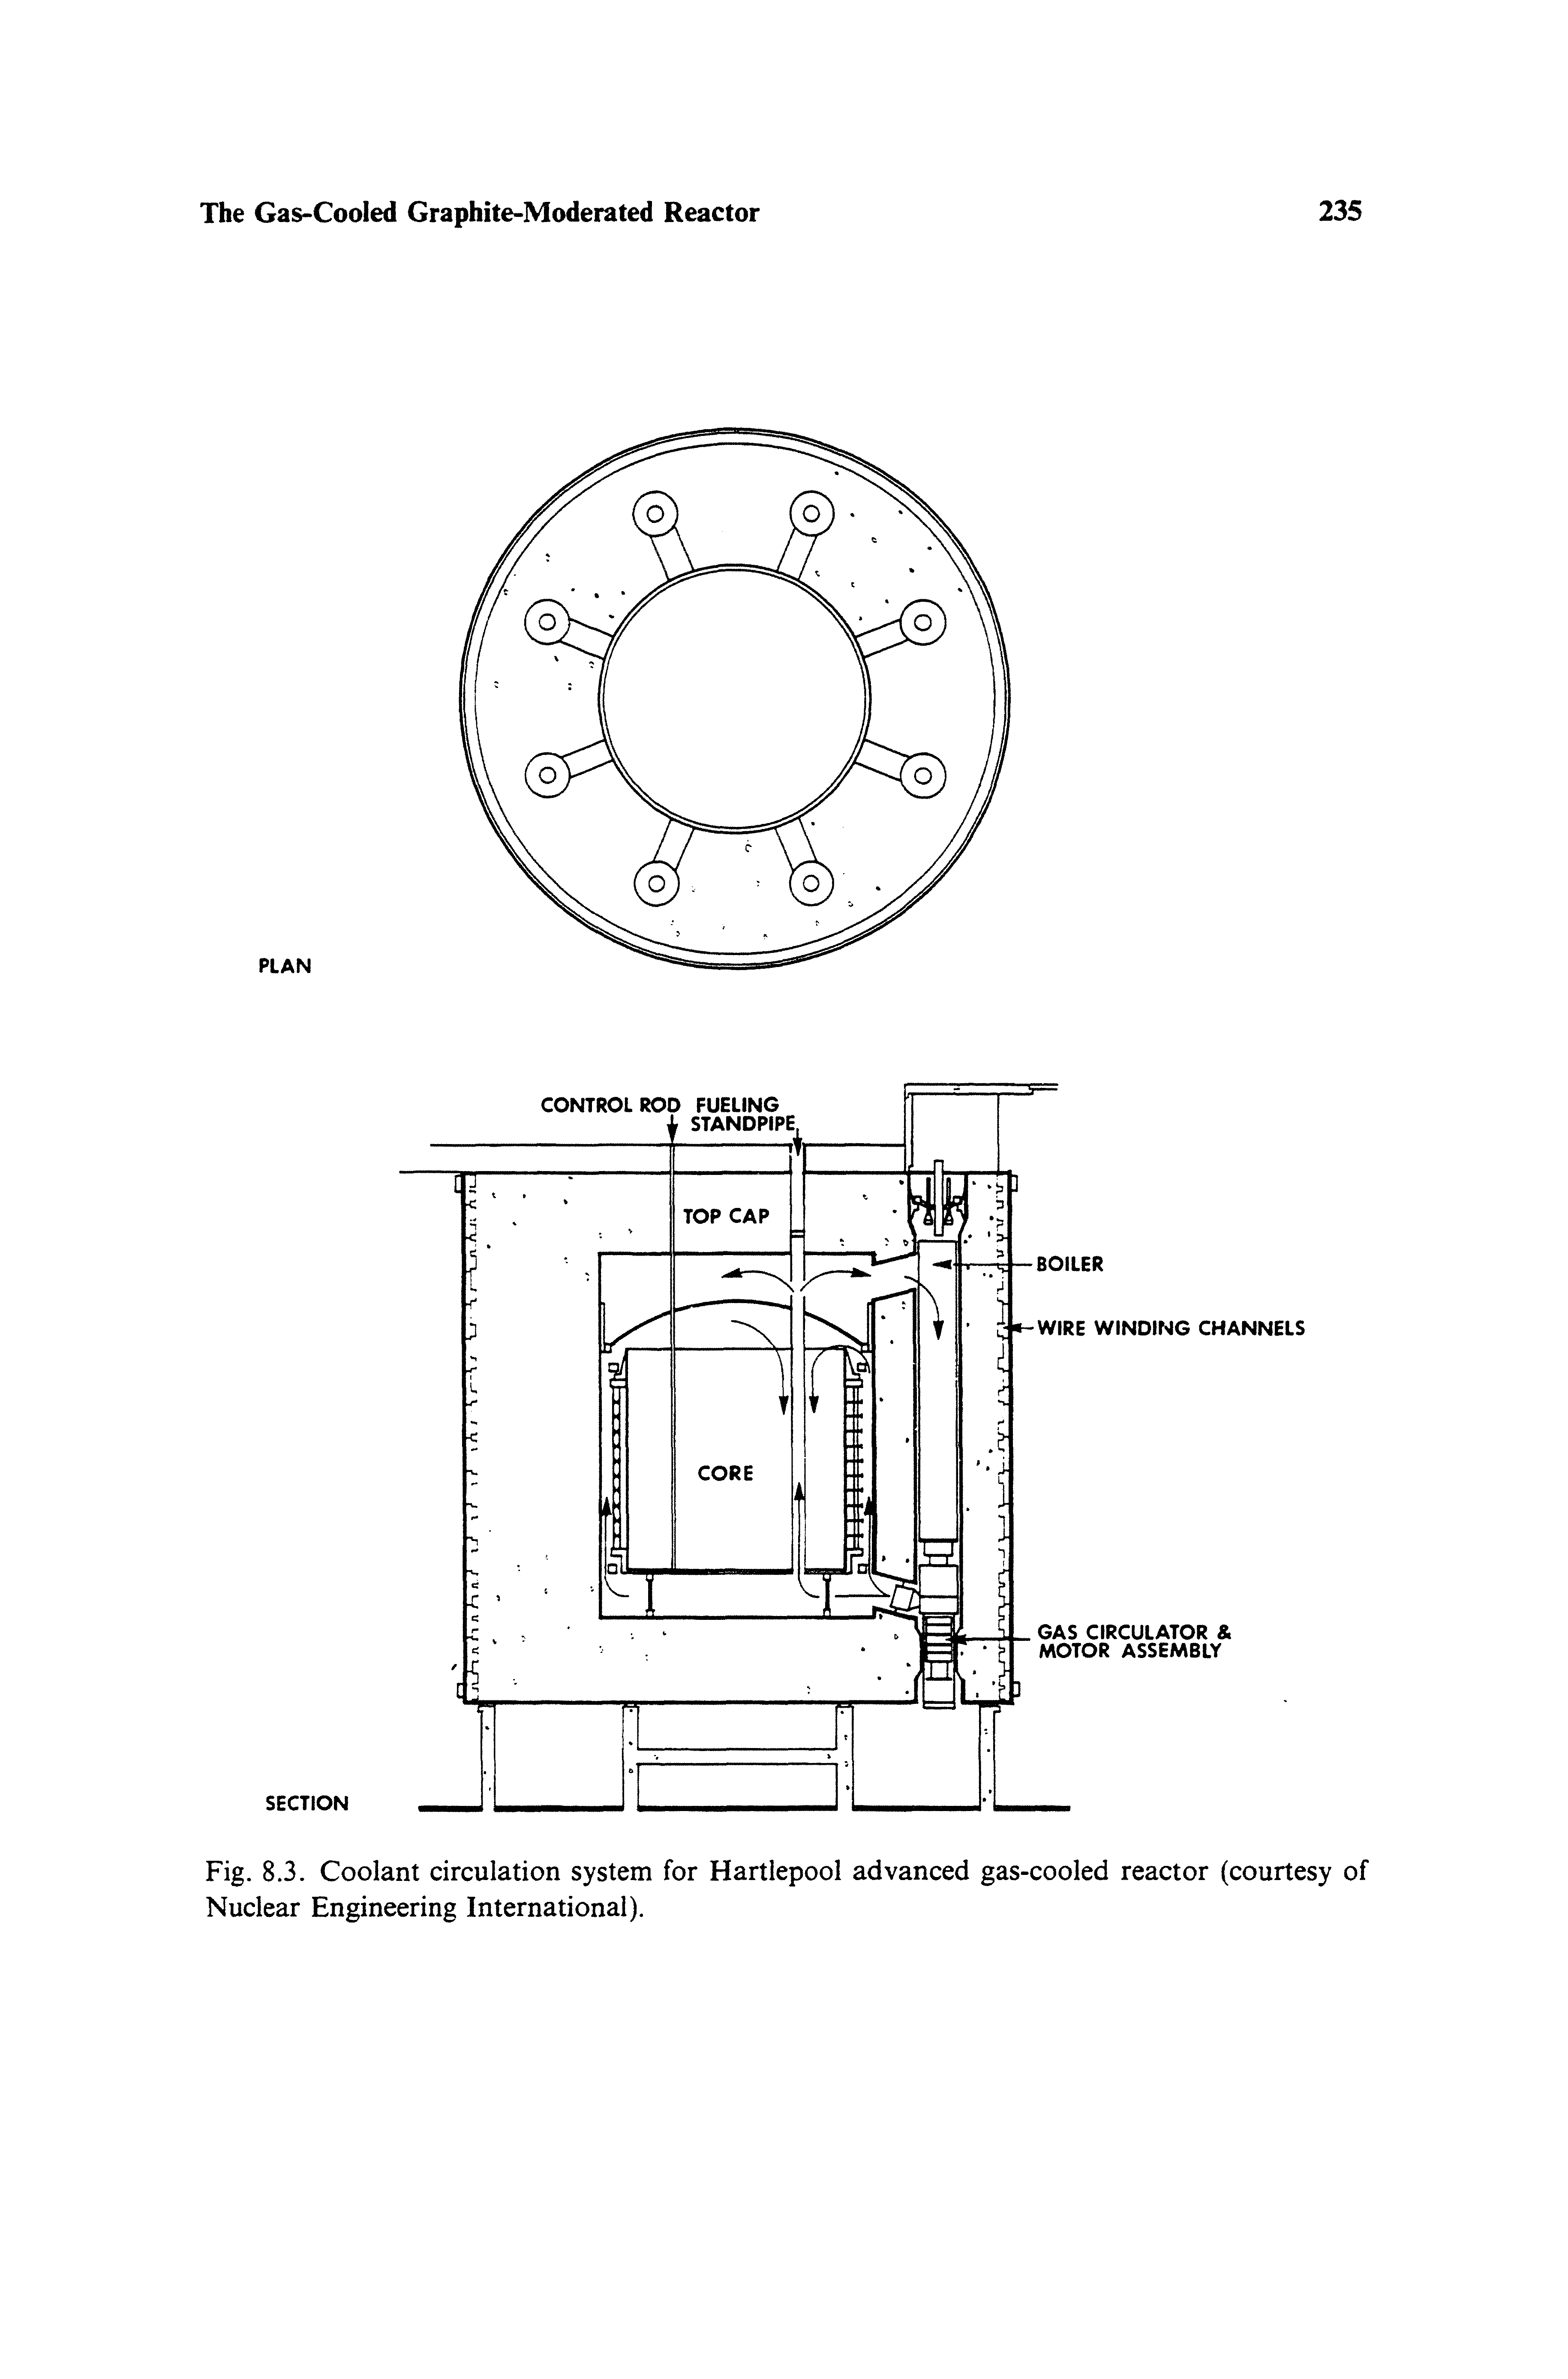 Fig. 8.3. Coolant circulation system for Hartlepool advanced gas-cooled reactor (courtesy of Nuclear Engineering International).